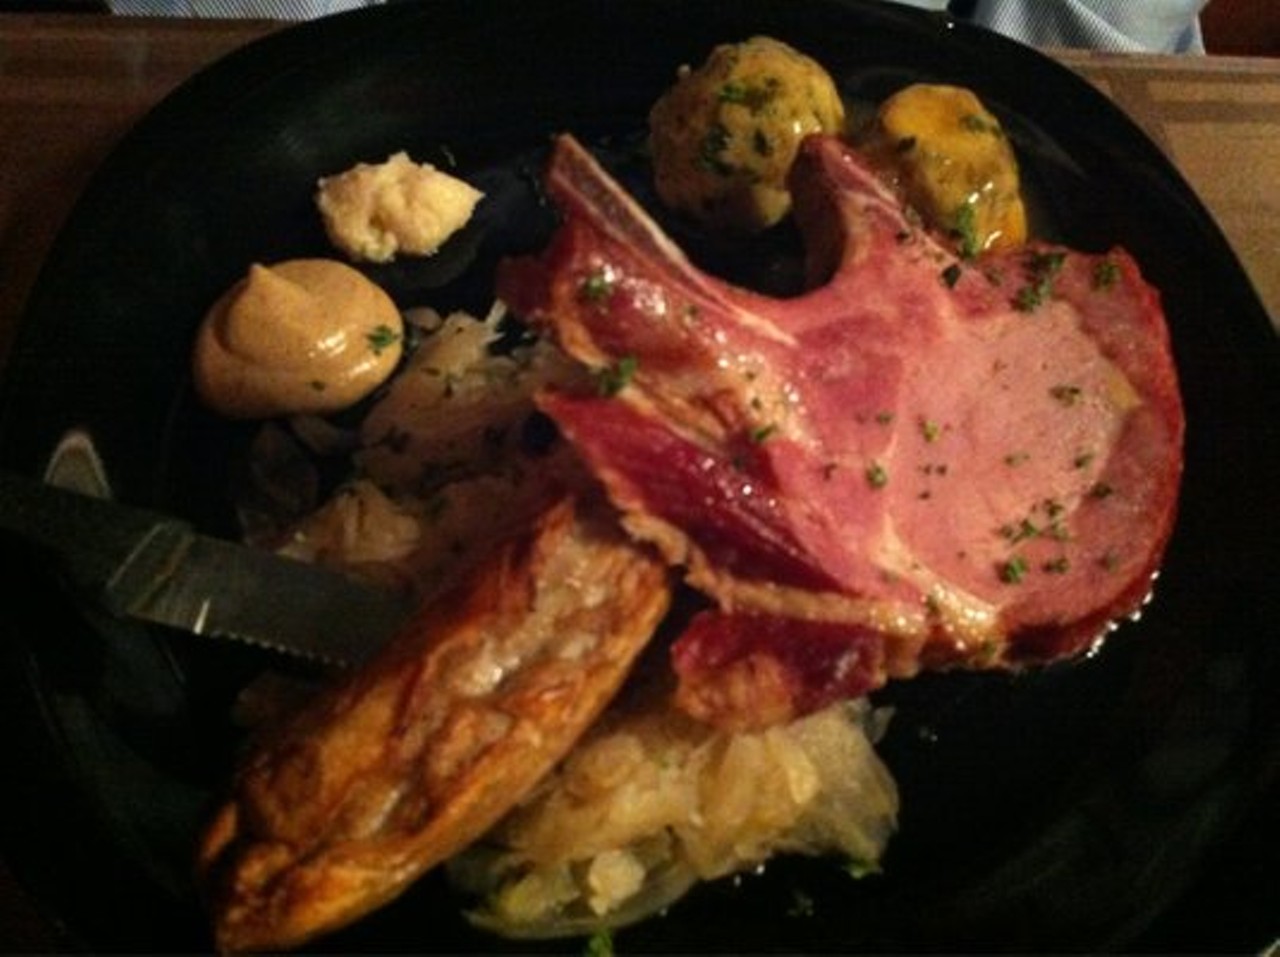 Rhienlander Platter - Grilled German style smoked pork chop and bratwurst served with potato croquettes and red cabbage